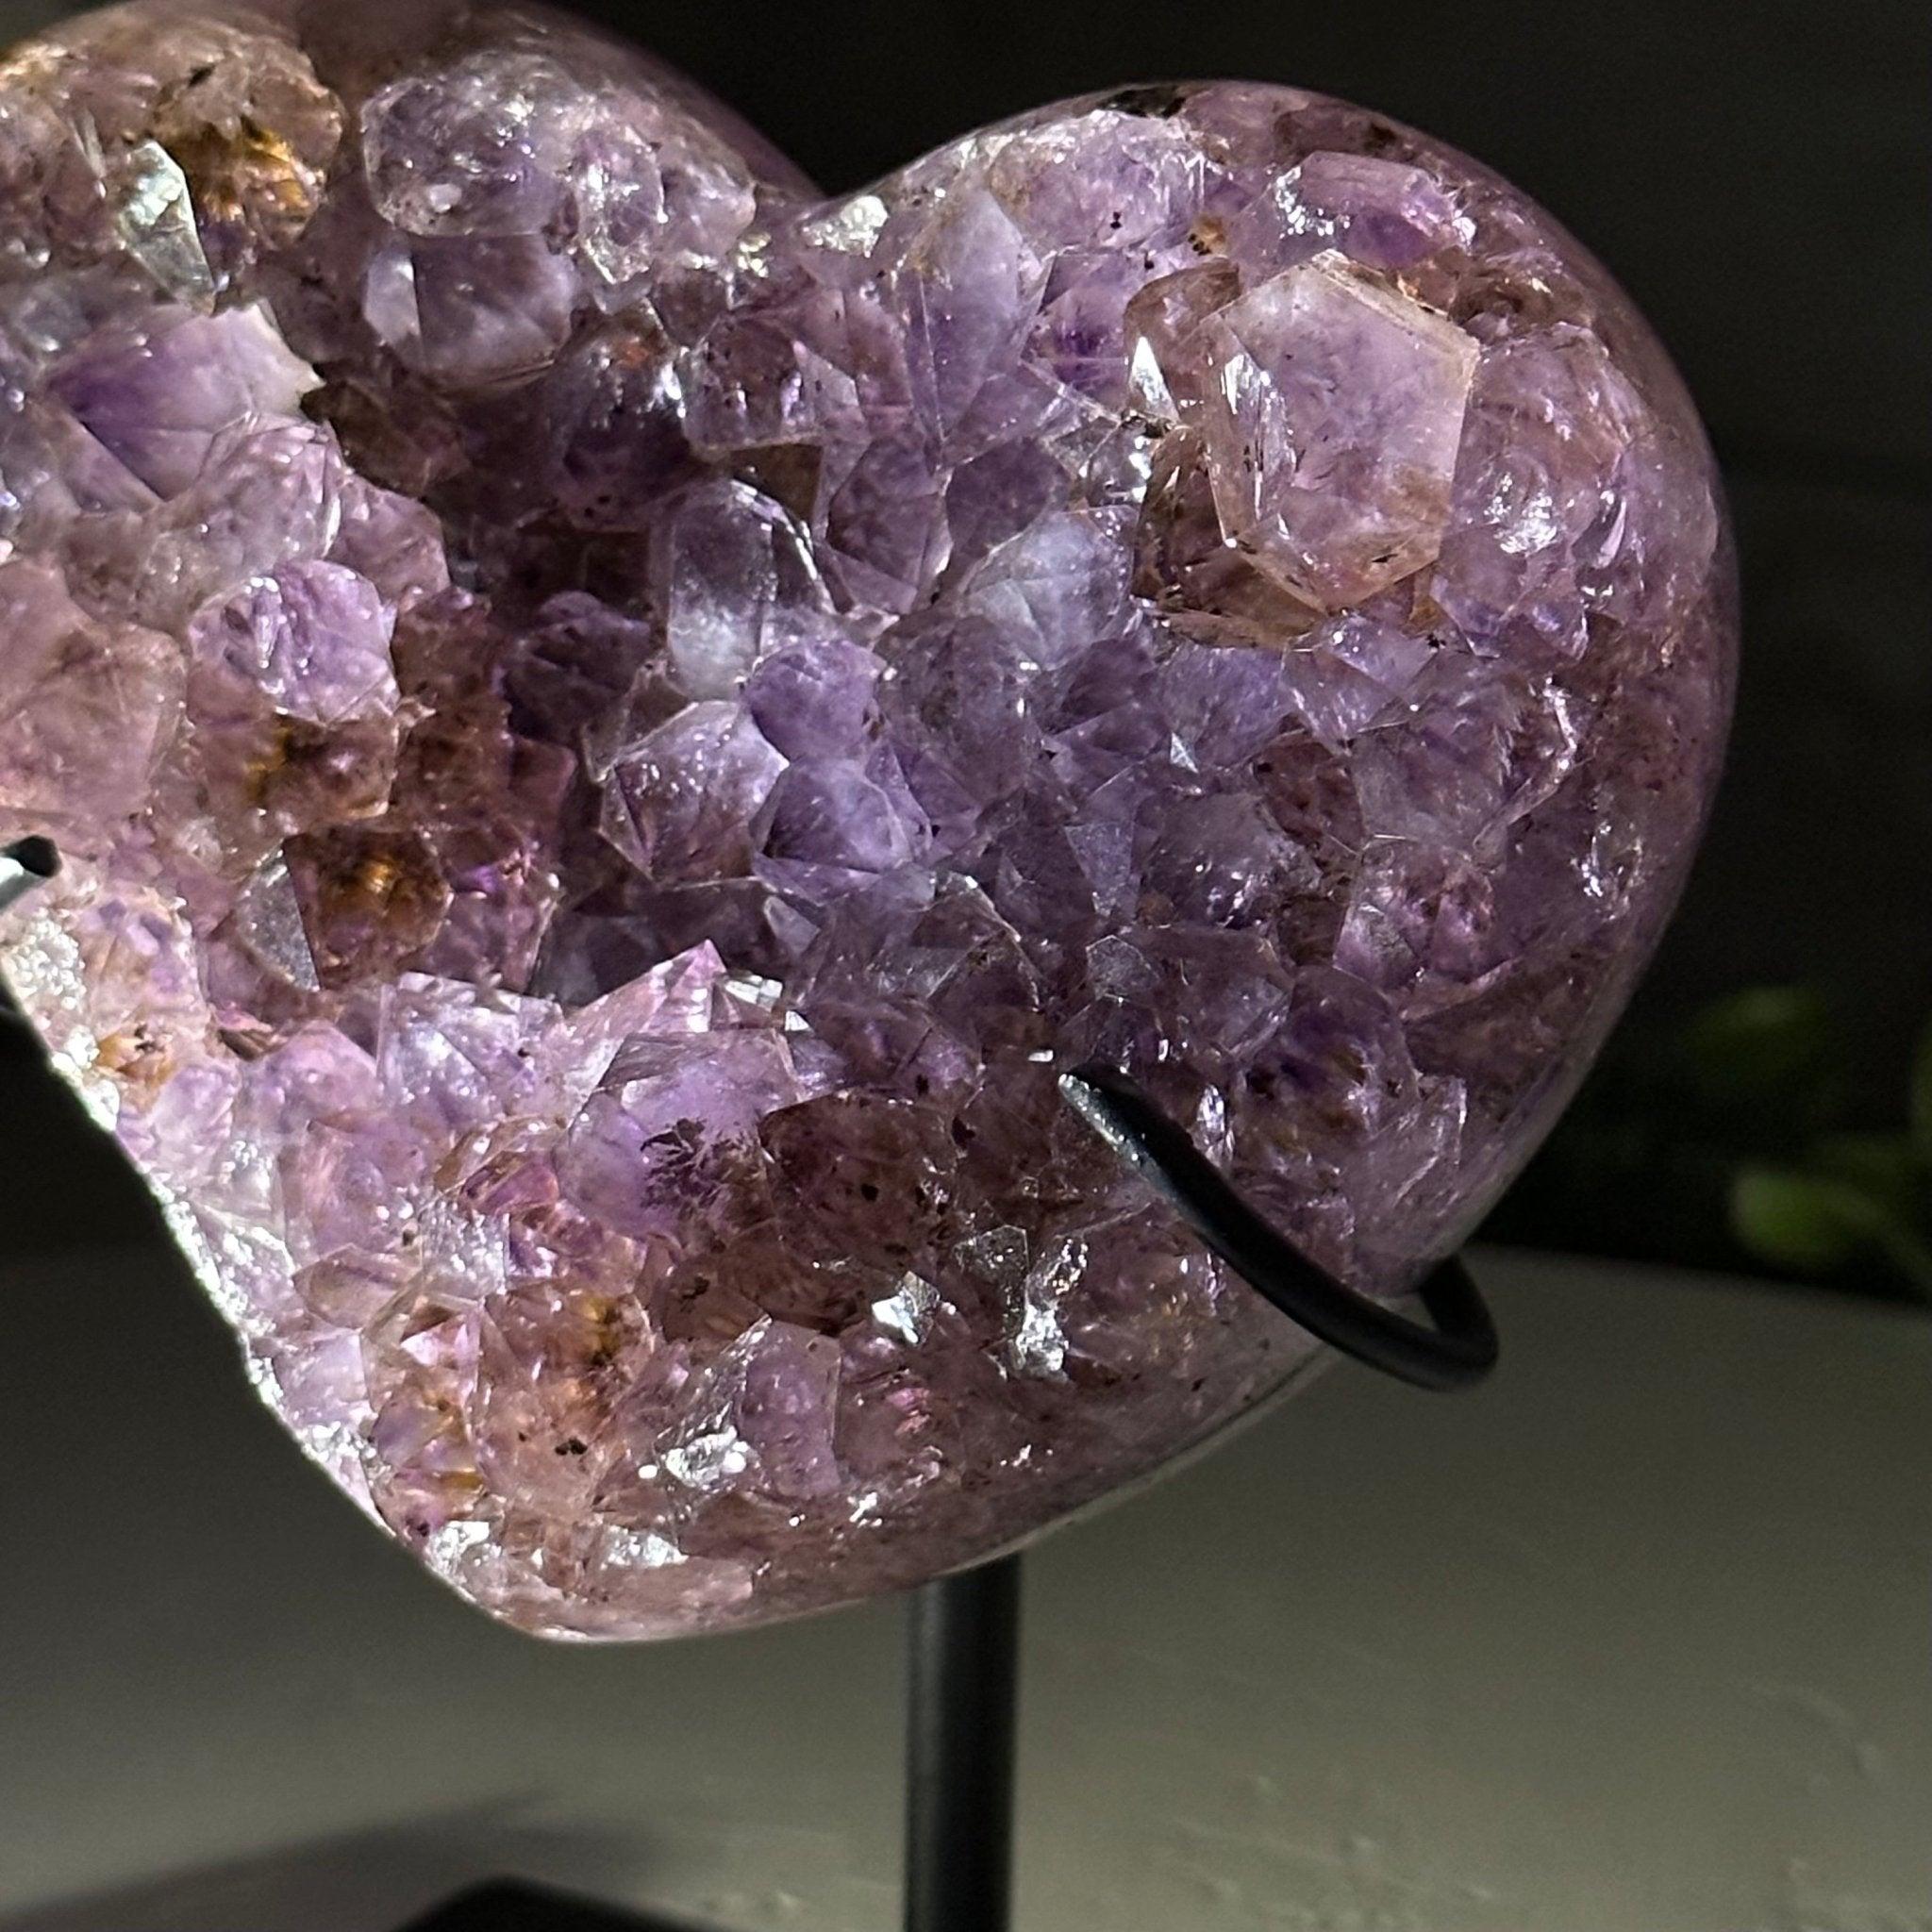 Extra Quality Amethyst Heart Geode w/ metal stand, 1.3 lbs & 5.5" Tall #5463-0297 - Brazil GemsBrazil GemsExtra Quality Amethyst Heart Geode w/ metal stand, 1.3 lbs & 5.5" Tall #5463-0297Hearts5463-0297